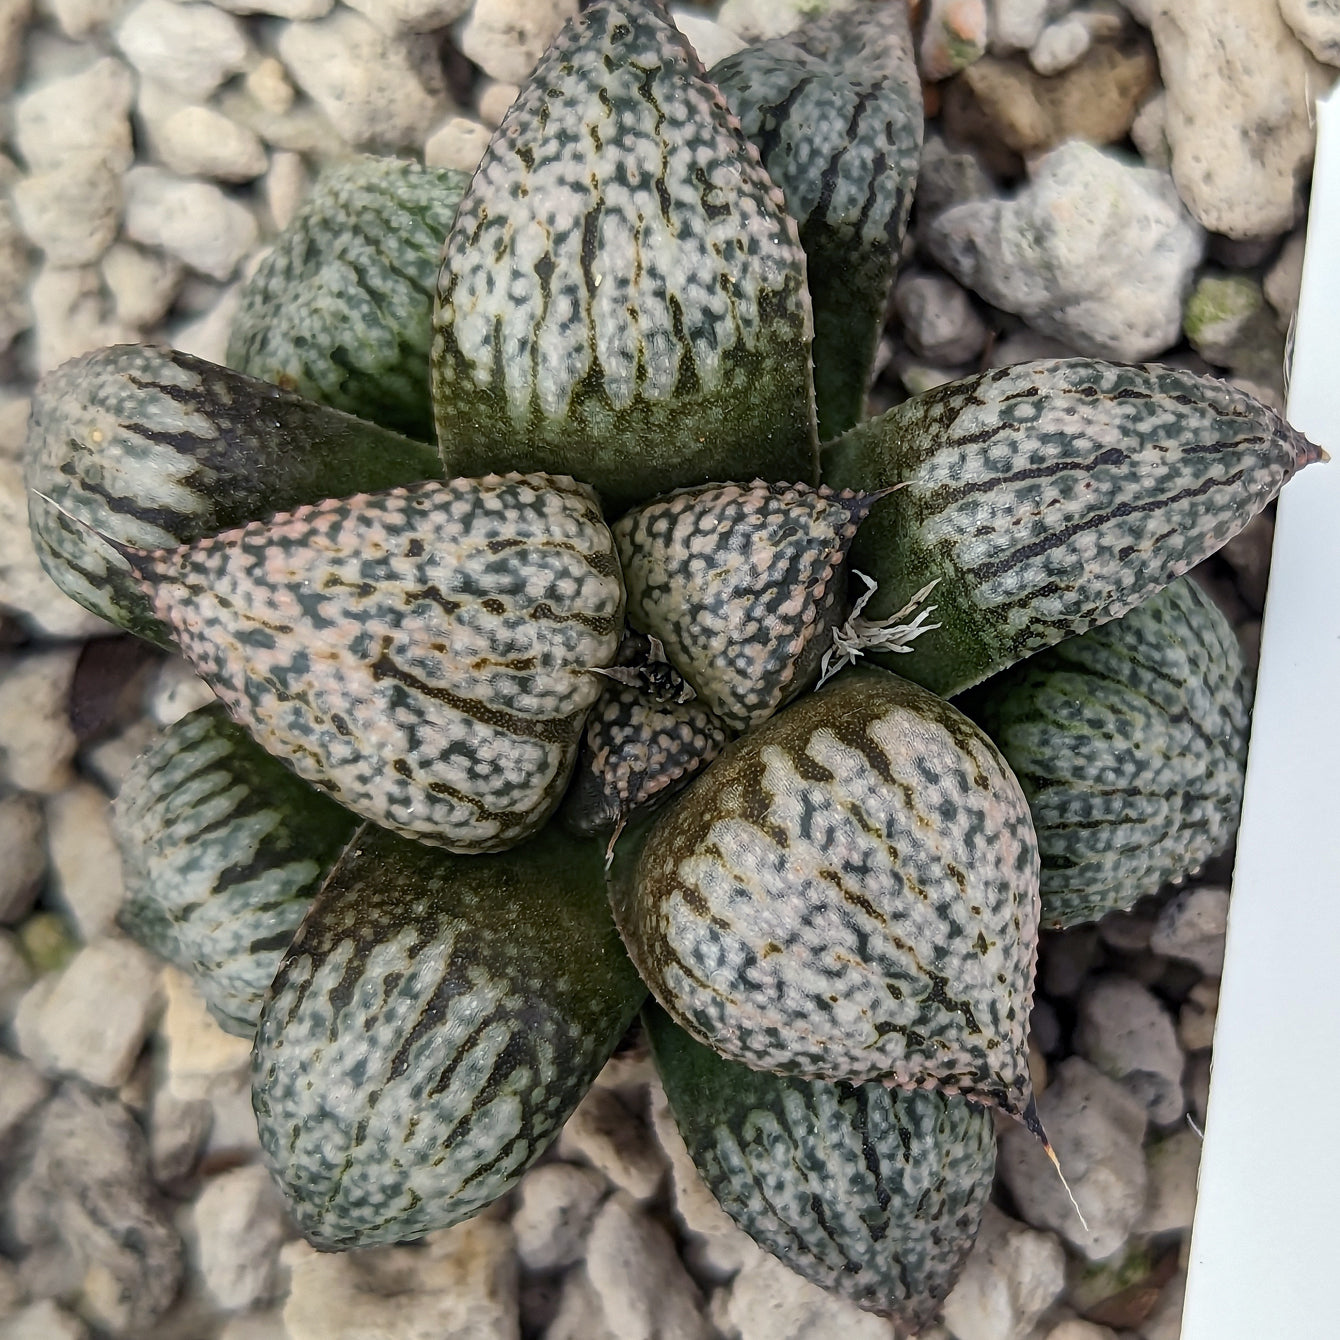 Haworthia "PP332" picta x Empress hybrid series #24 SOLD OUT